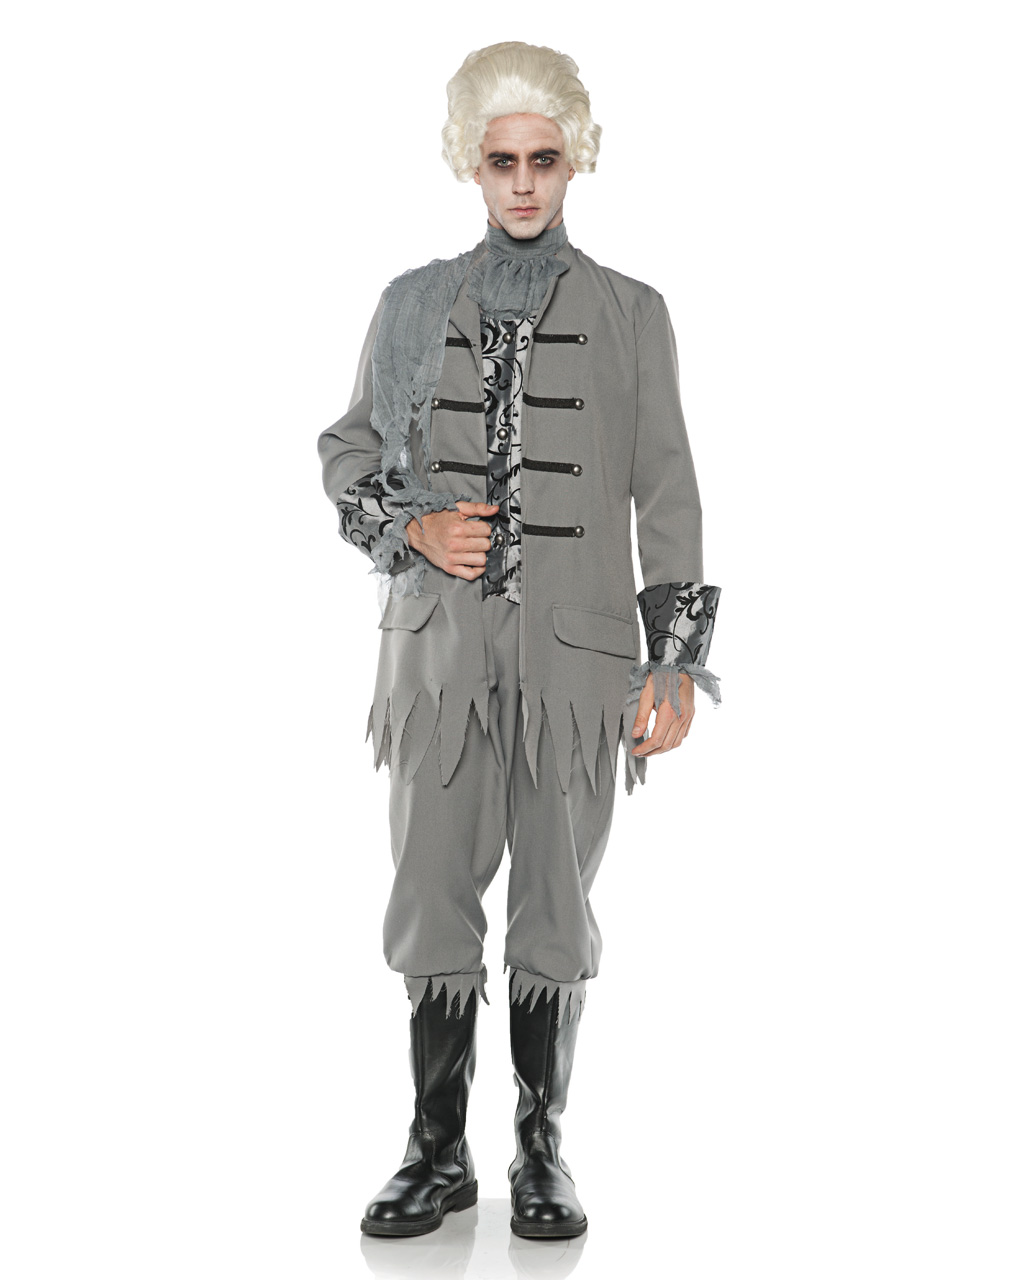 Nobleman Ghost Costume for Halloween 